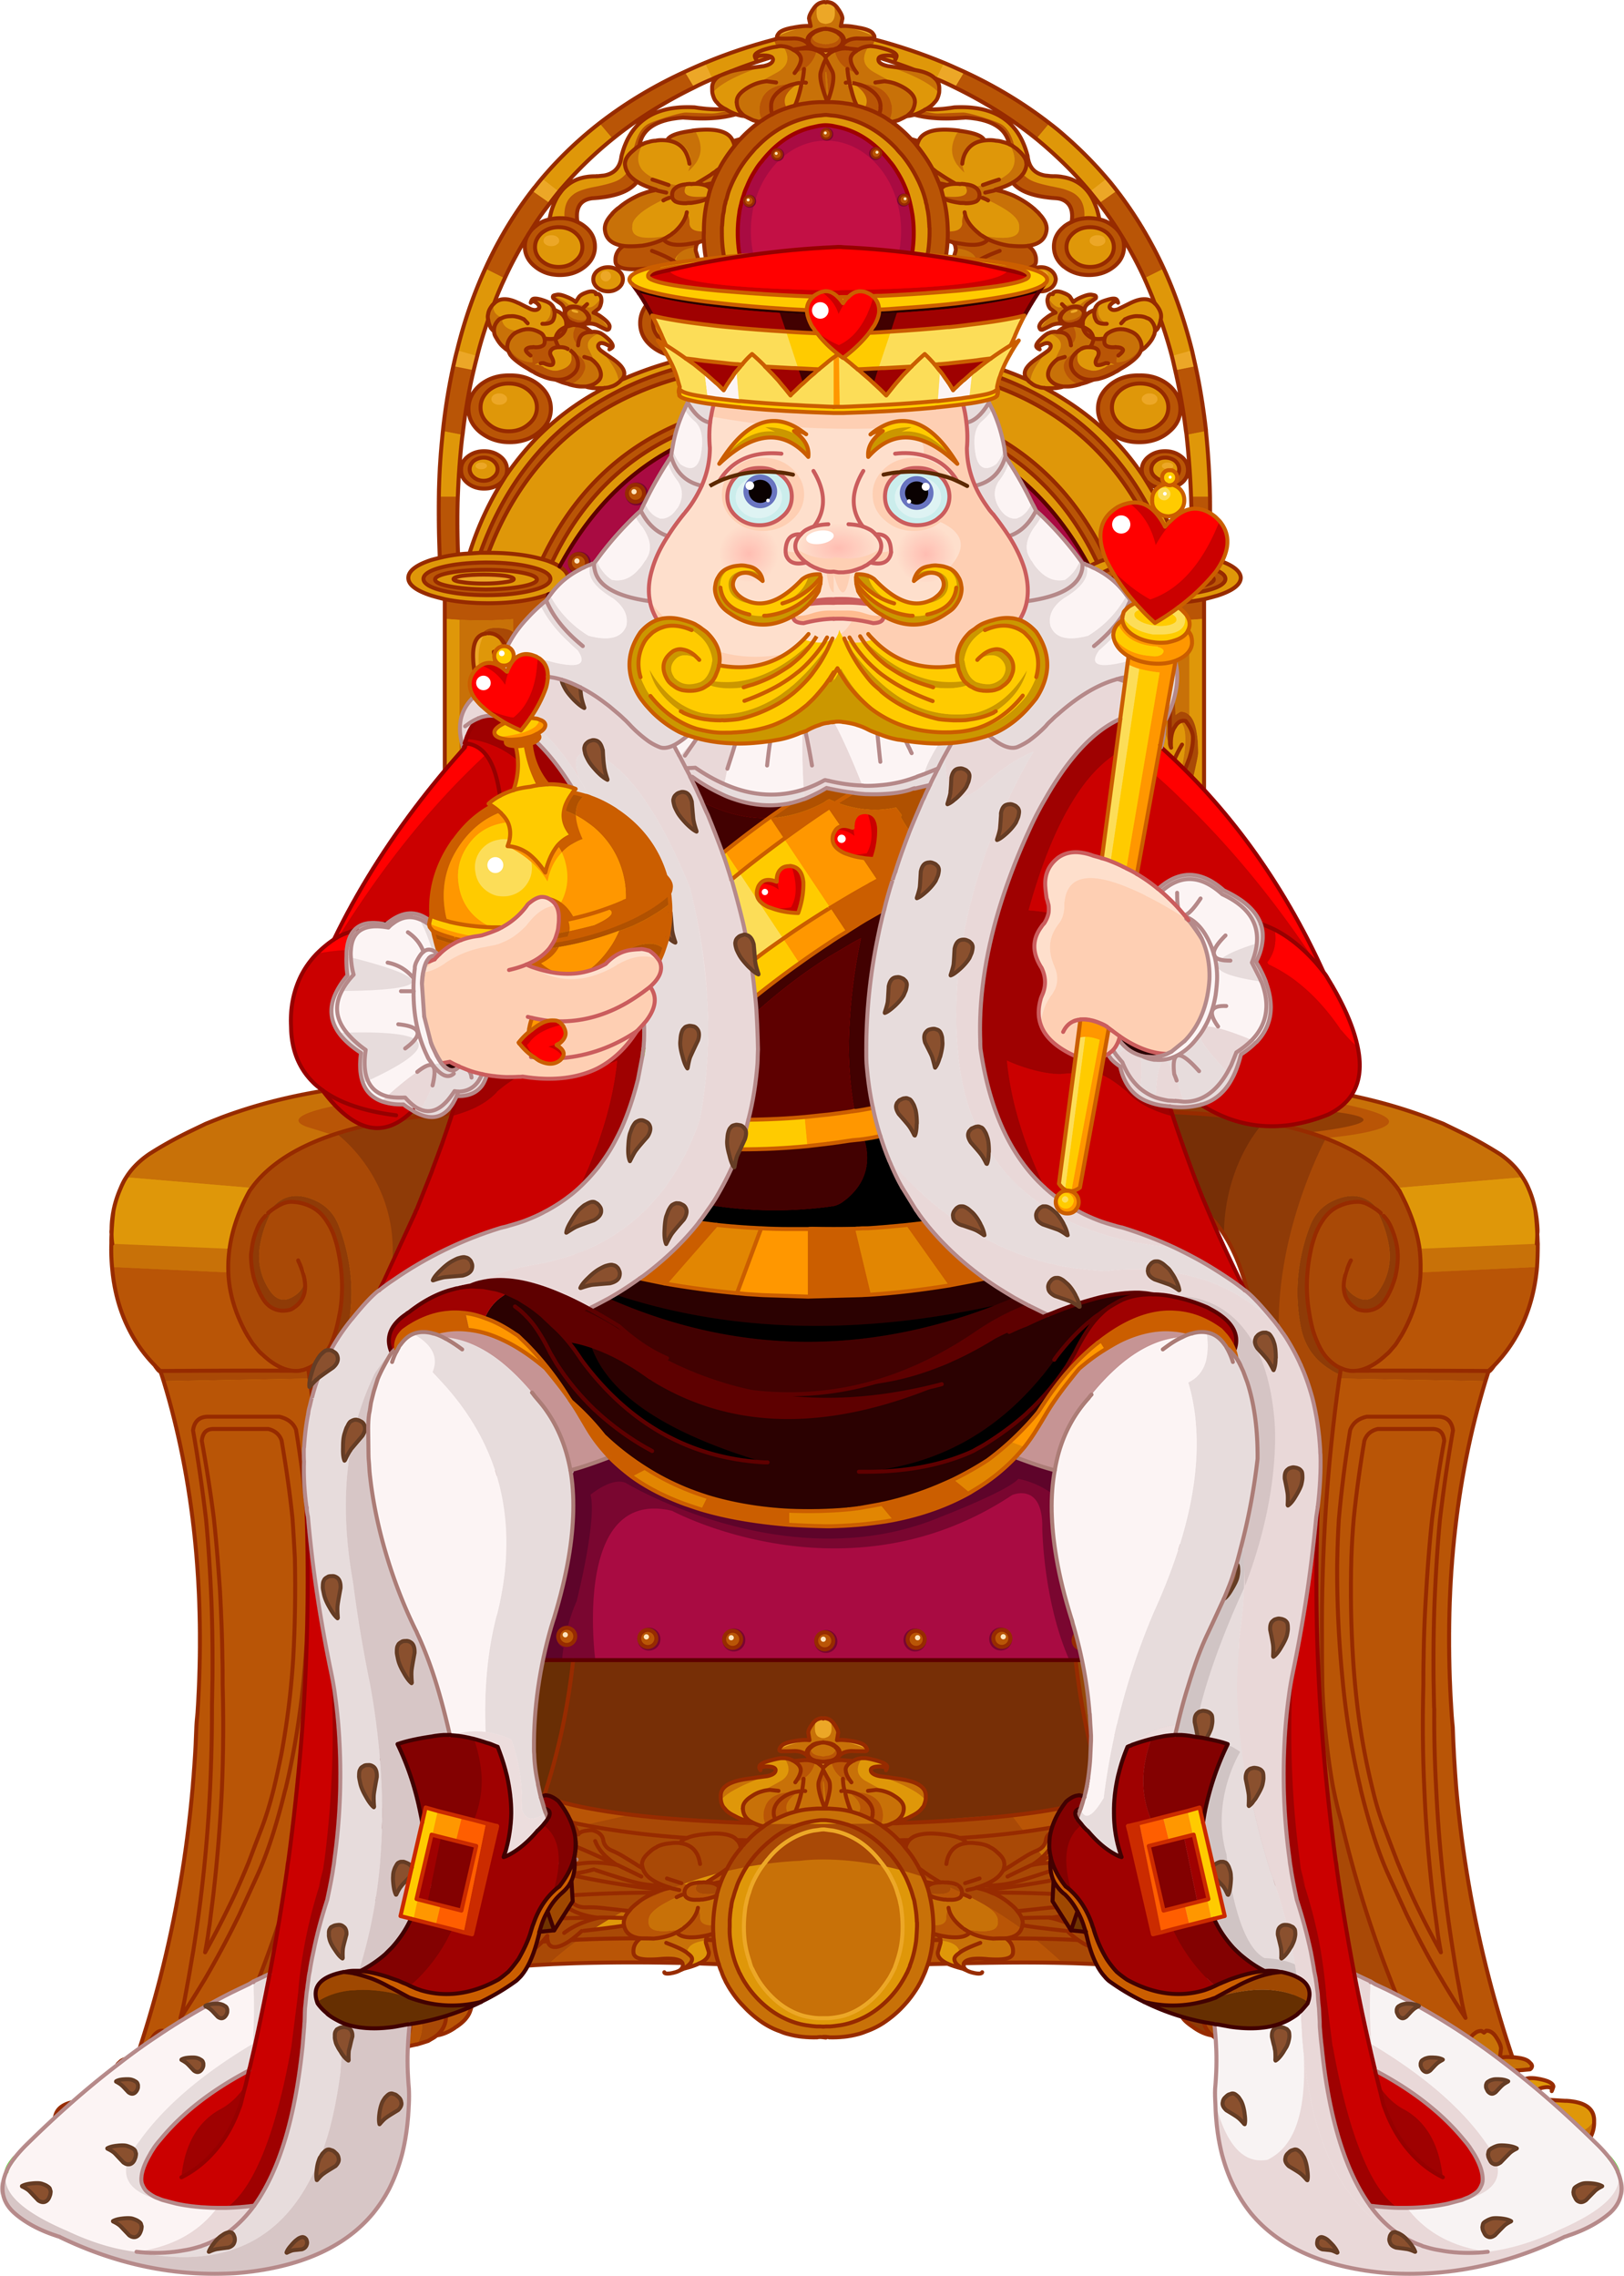 Throne King Royalty-free Monarch - King Sitting On A Chair (1783x2499)